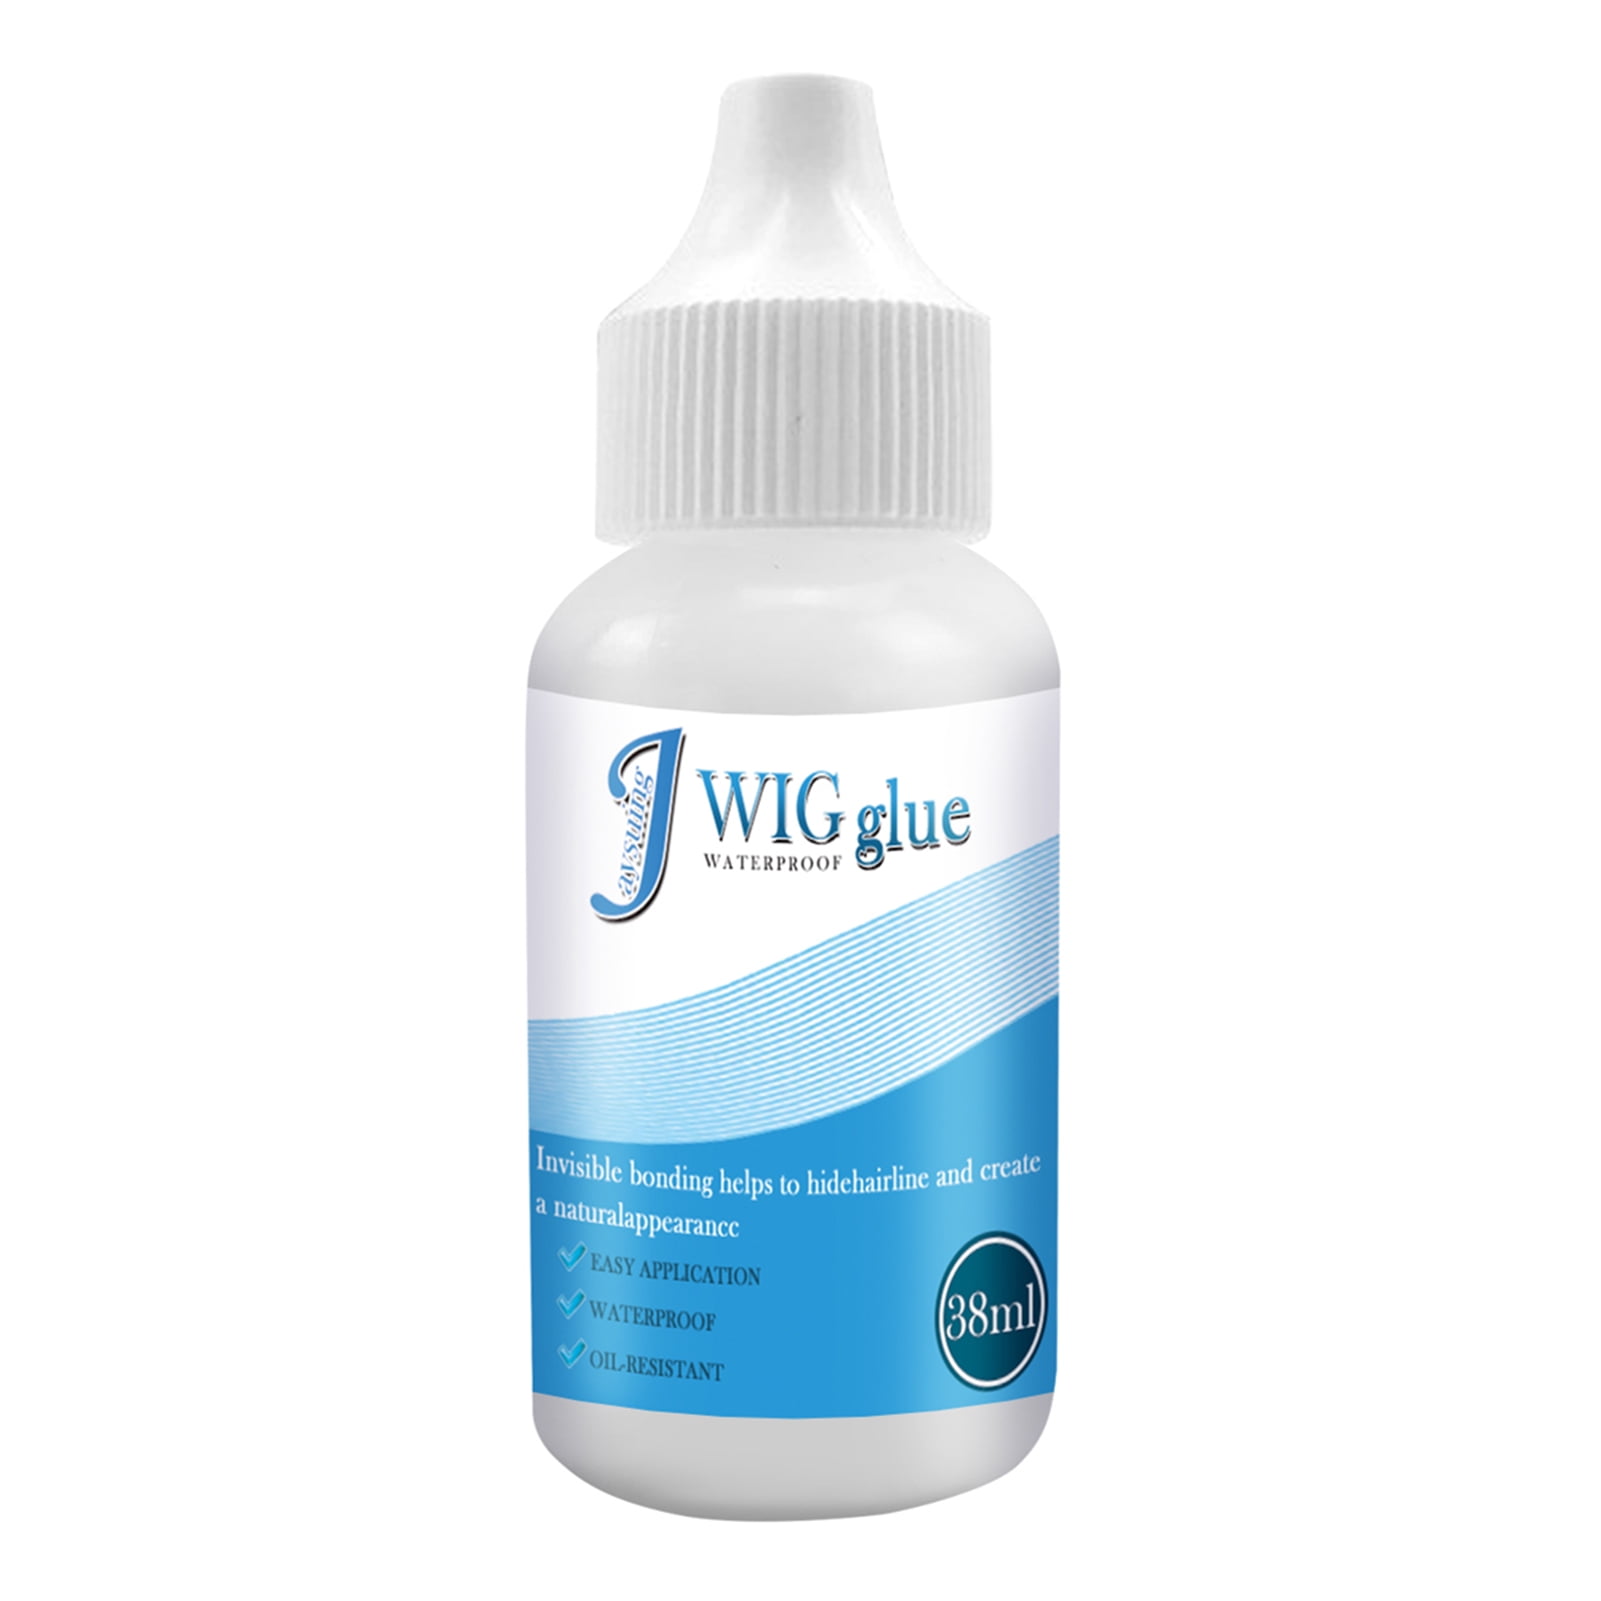 Jaysuing 38ml Wig Glue Only Scalp Invisible Bonding Easy Application Waterproof Oil-Resistant Hide Hairline Natural Appearance, Size: 38 ml